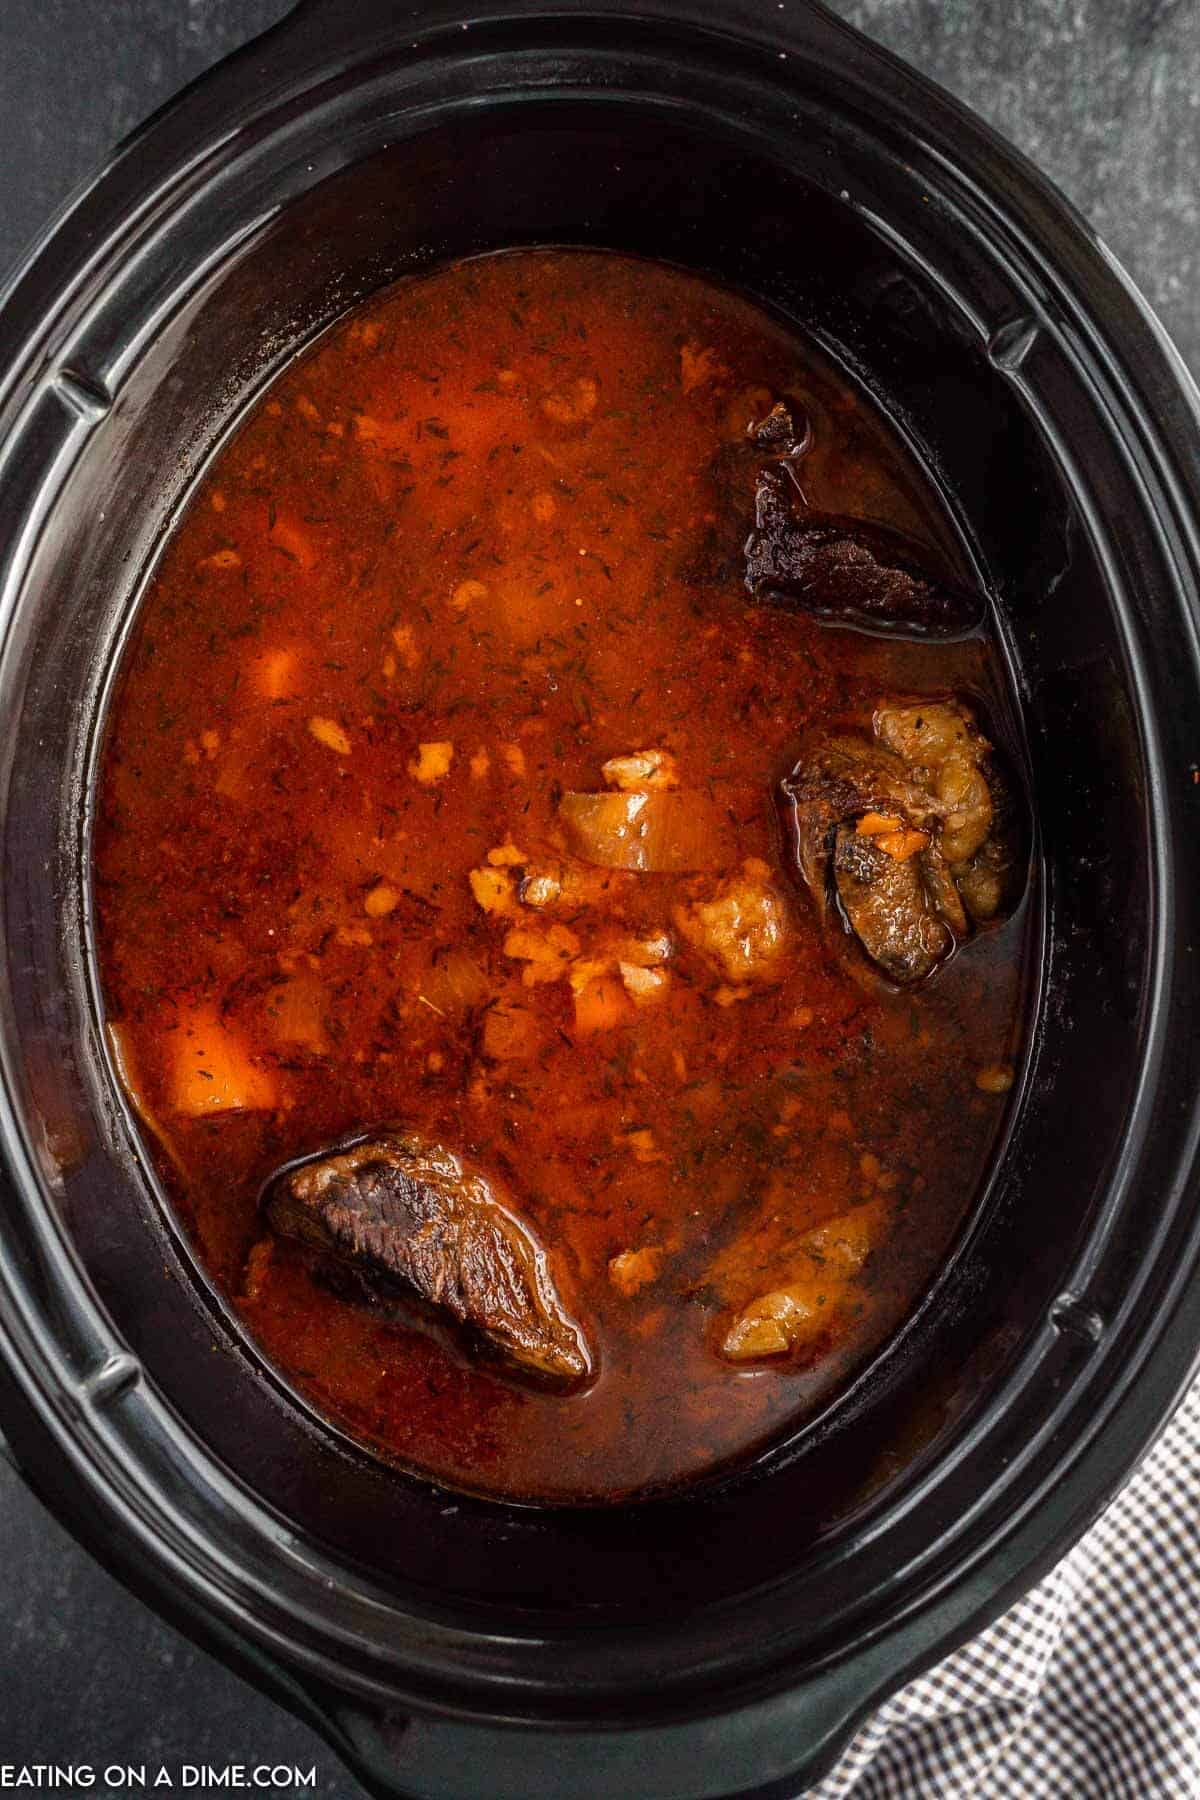 pouring the slurry in the crock pot with the cooked short ribs